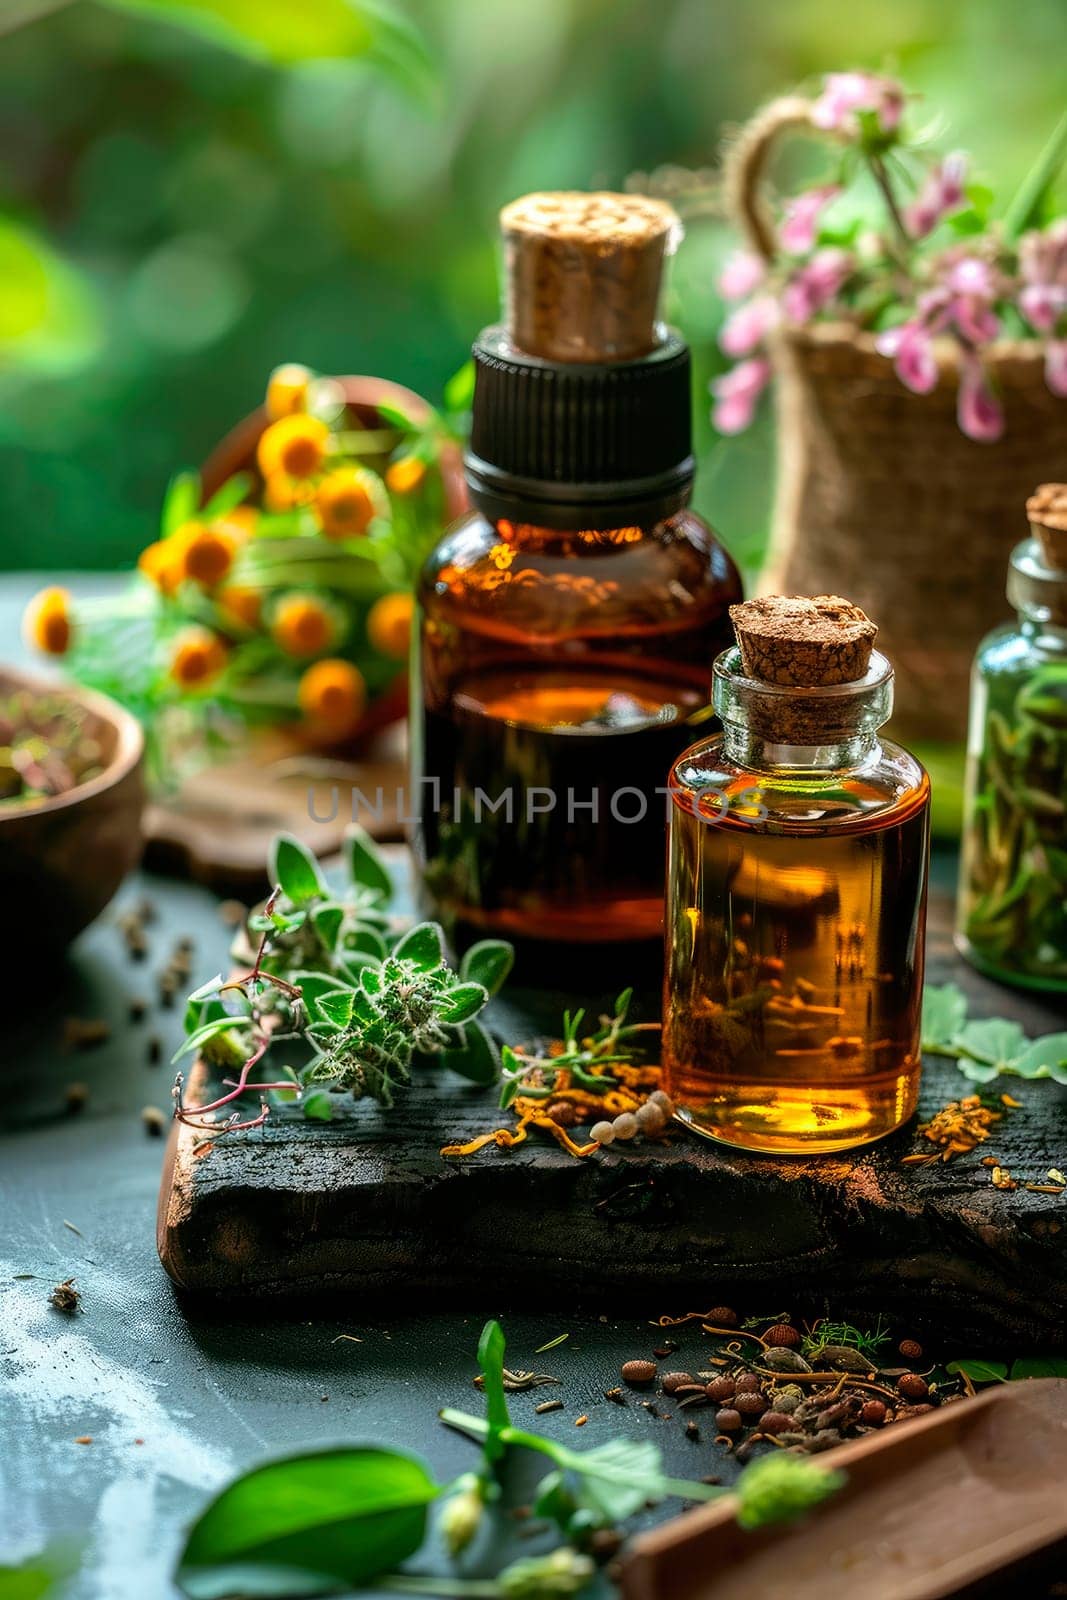 tinctures of flowers and herbs in a bottle. selective focus. nature.